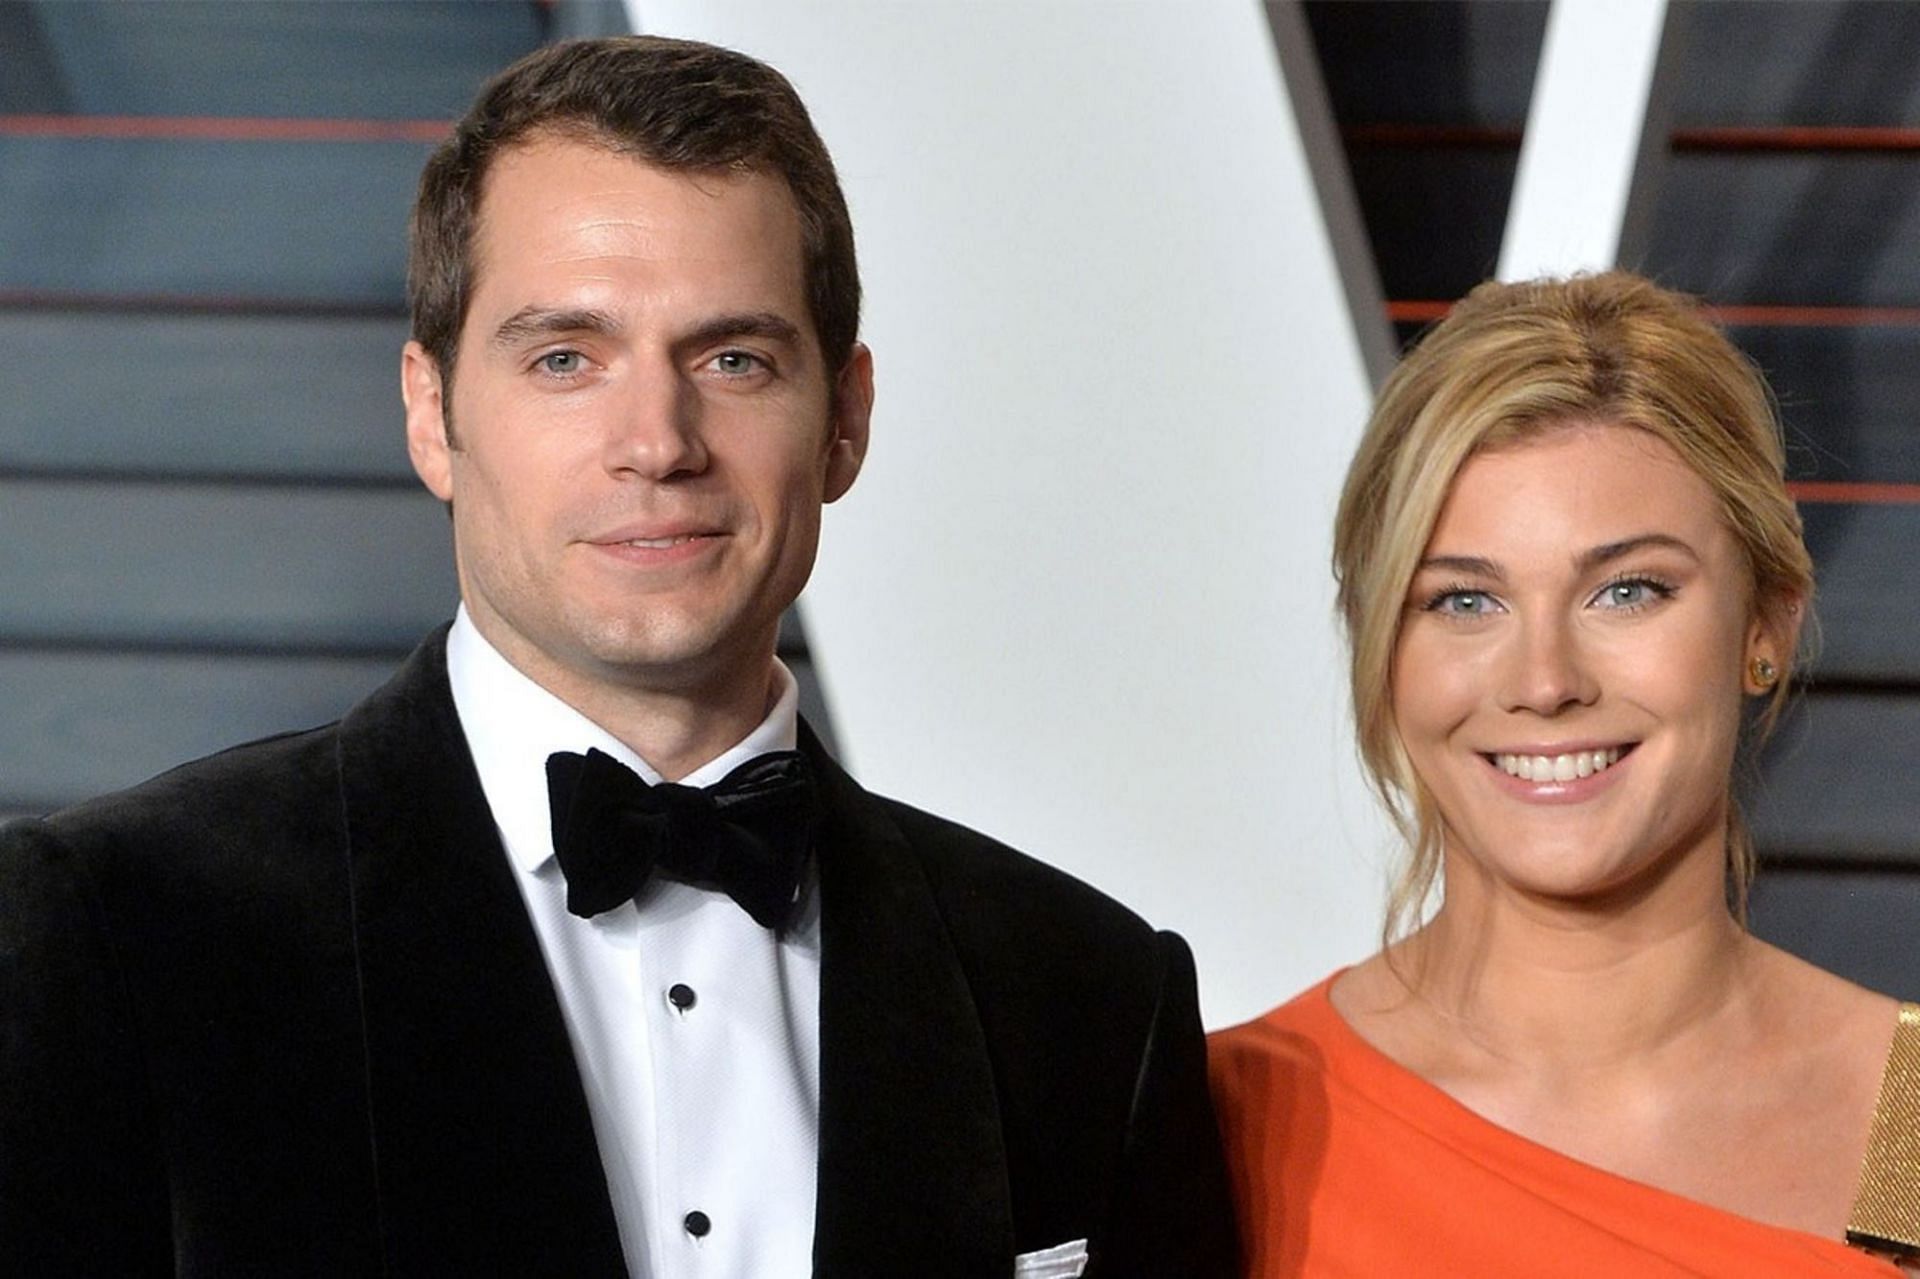 People want to cancel Henry Cavill for dating Gina Carano, and fans are not  happy